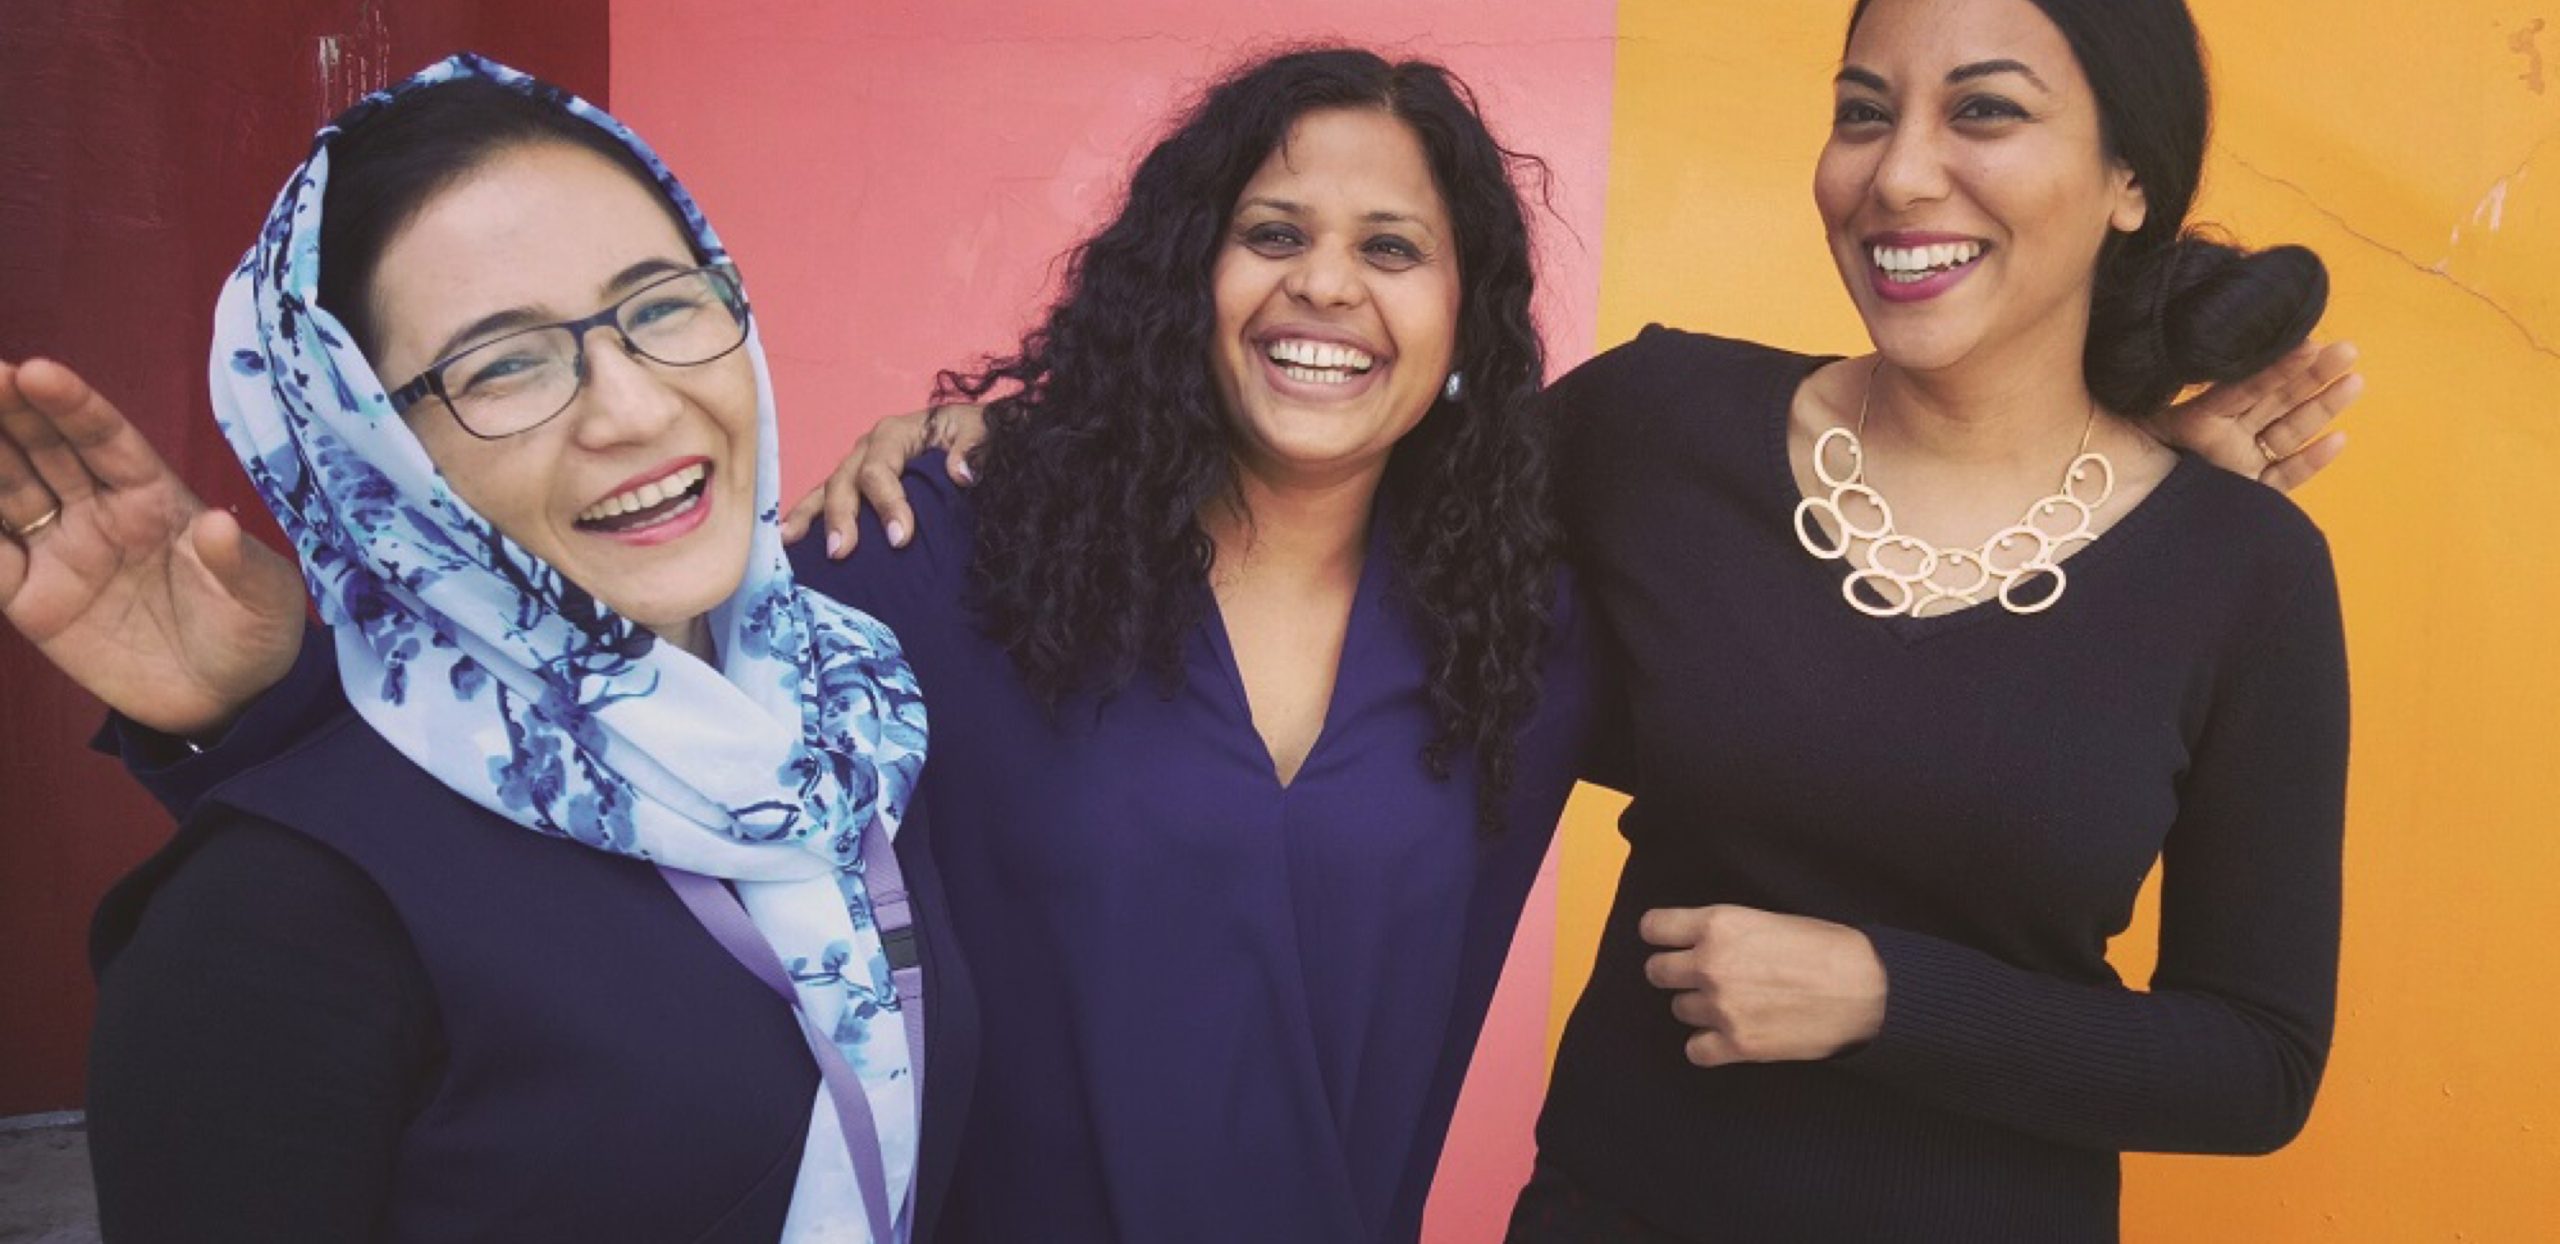 three women of different ethnic backgrounds laughing and smiling at camera in front of colourful wall